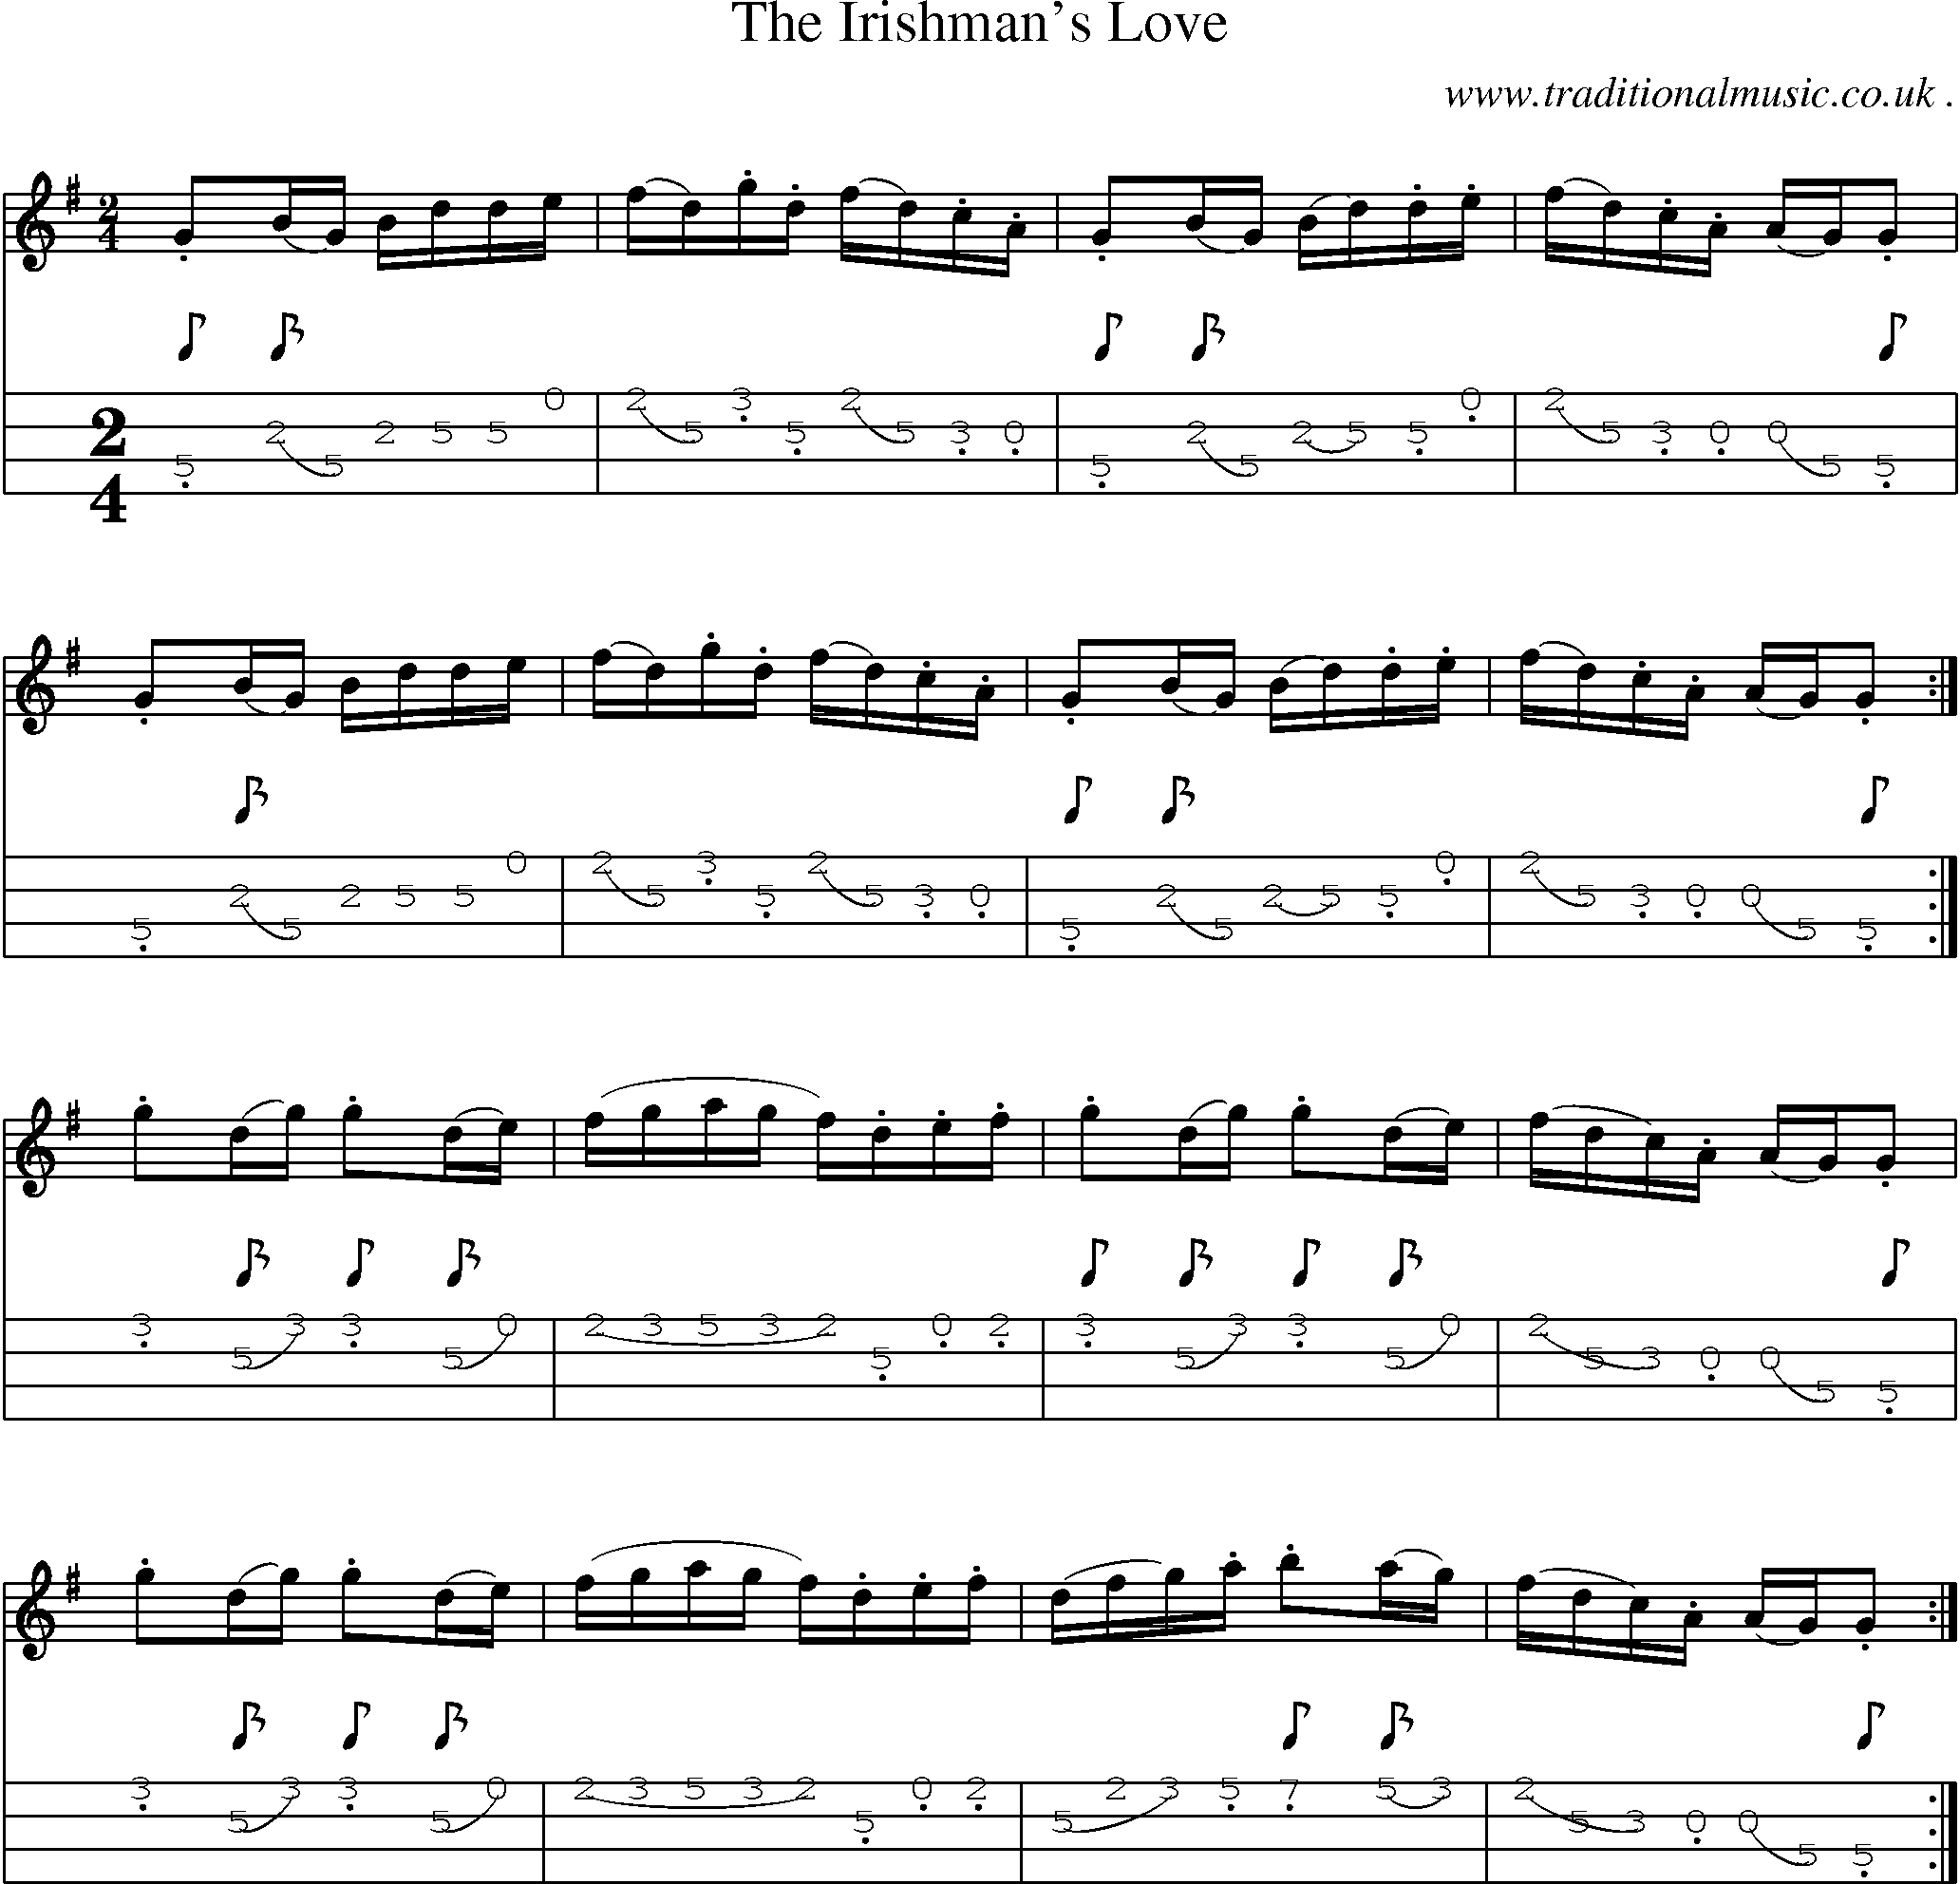 Sheet-Music and Mandolin Tabs for The Irishmans Love